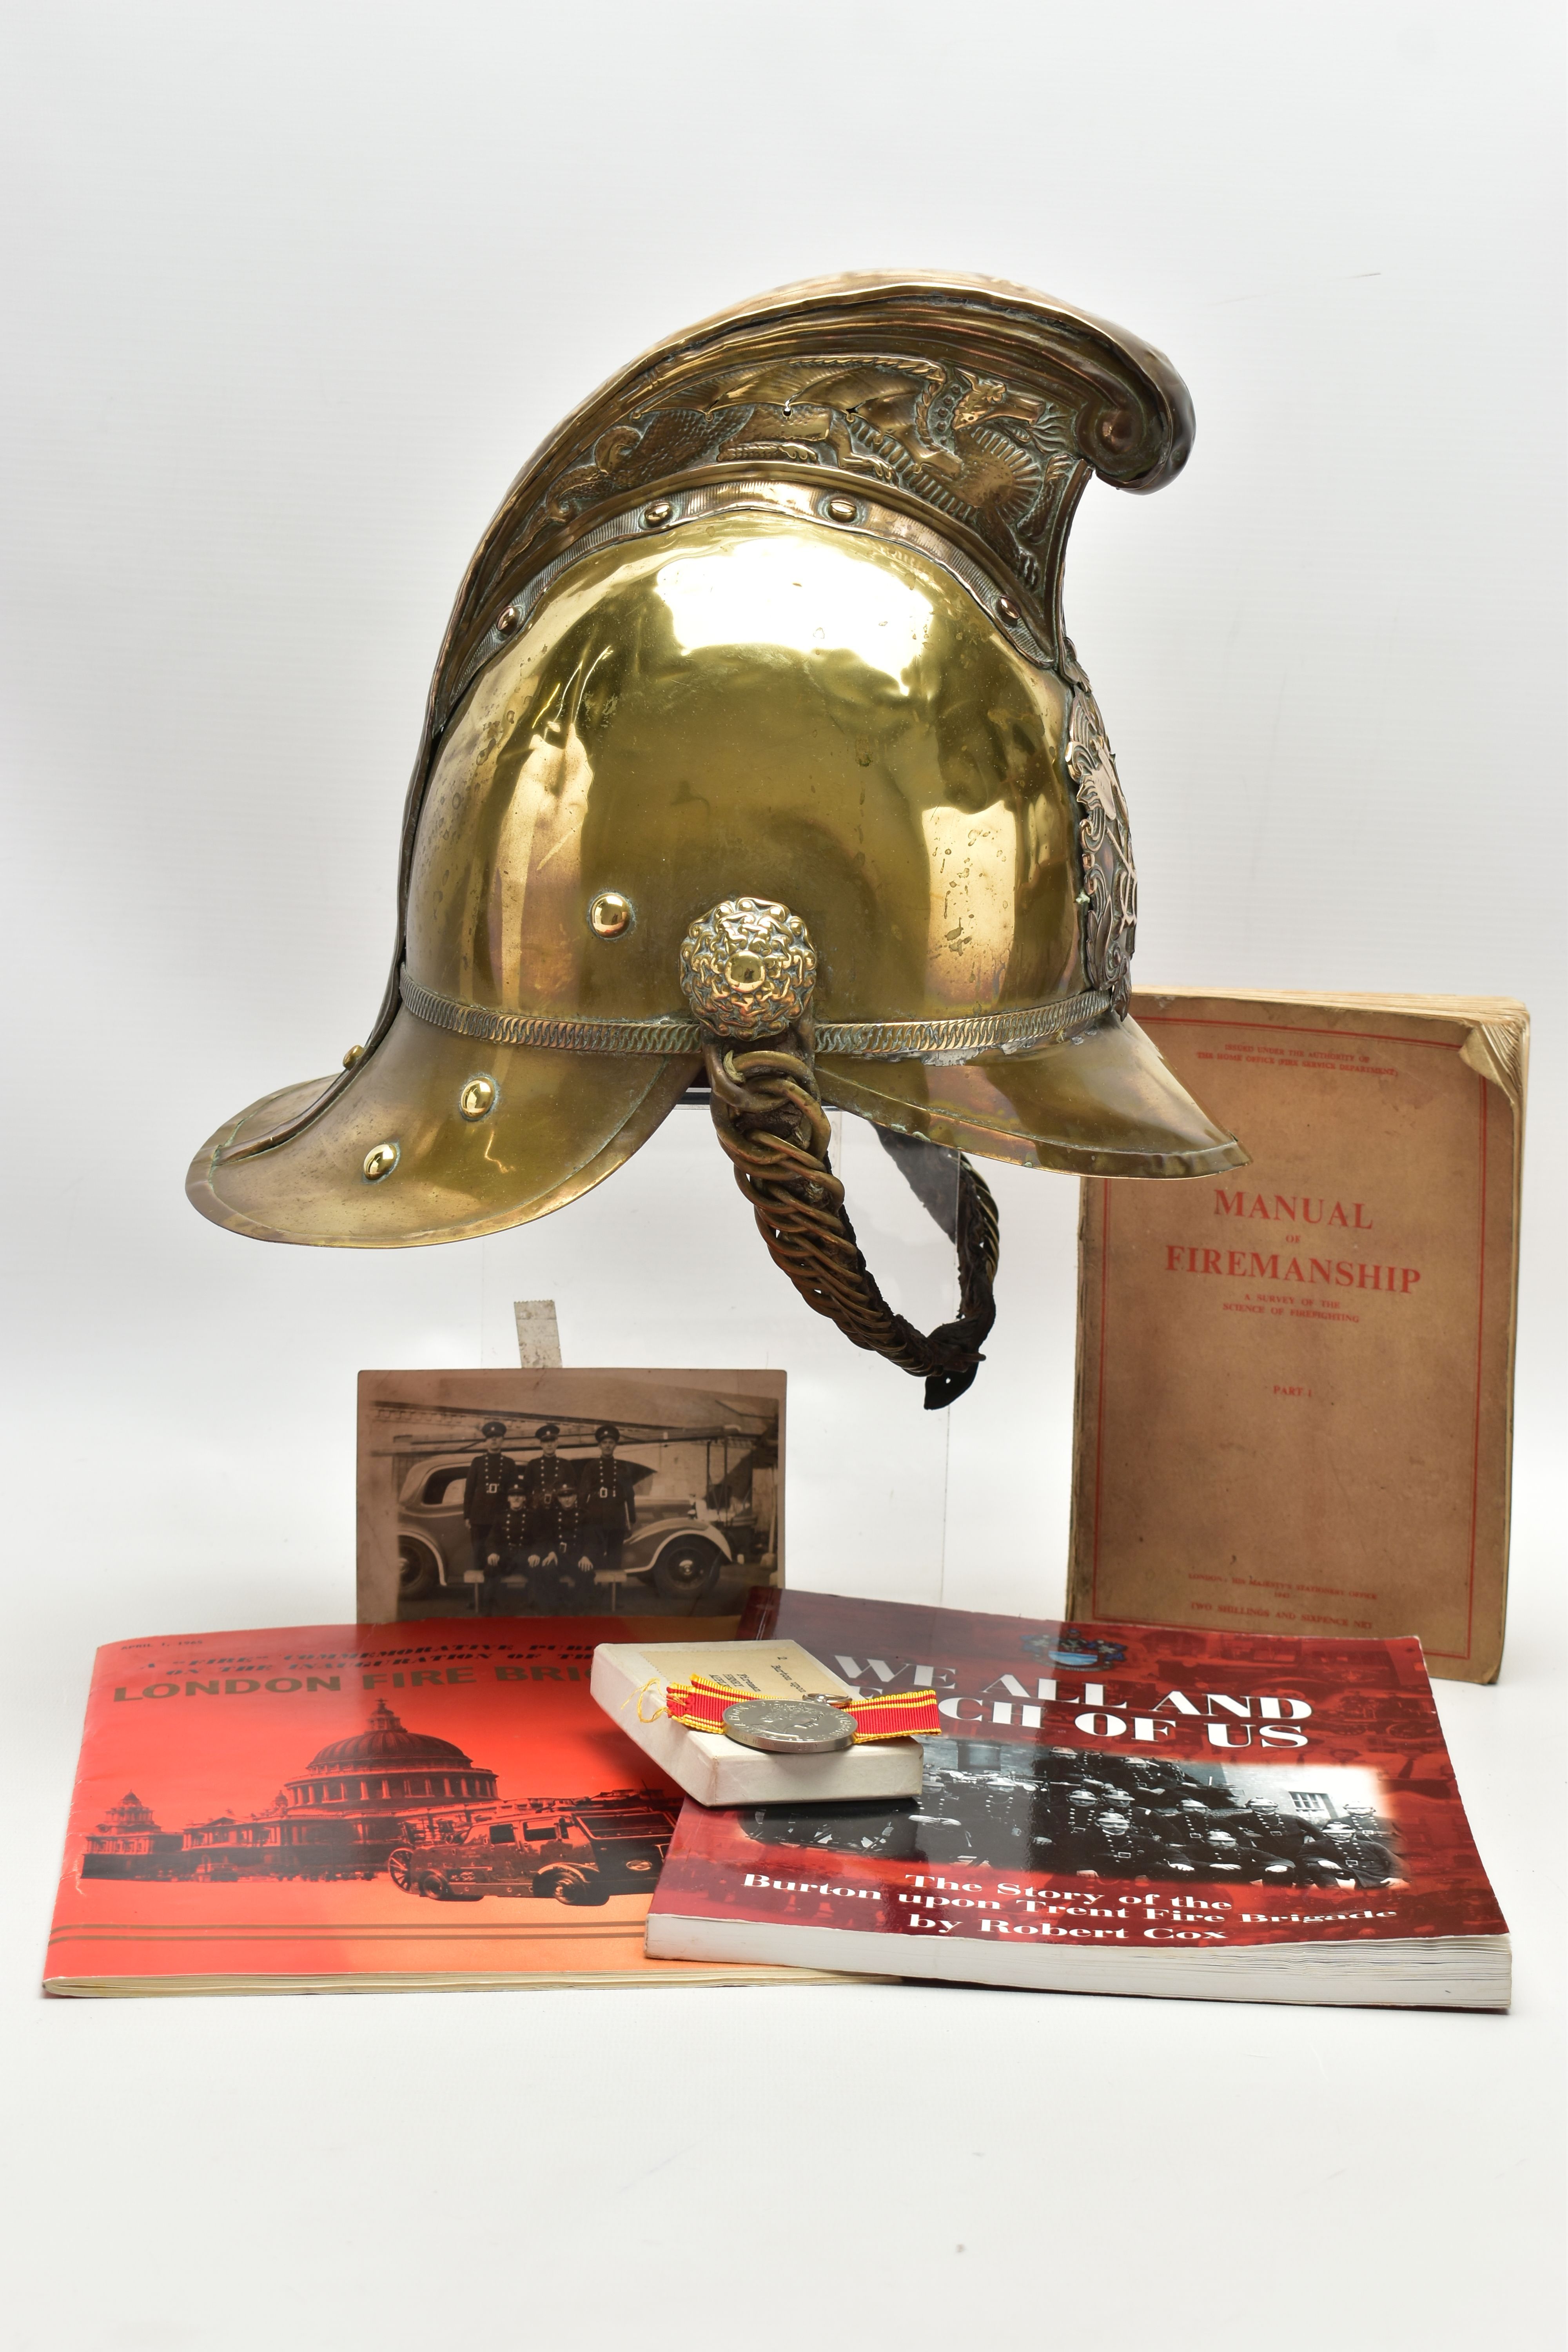 A VICTORIAN BRASS MERRYWEATHER TYPE FIREMAN'S HELMET, with a worn leather and brass chin strap and